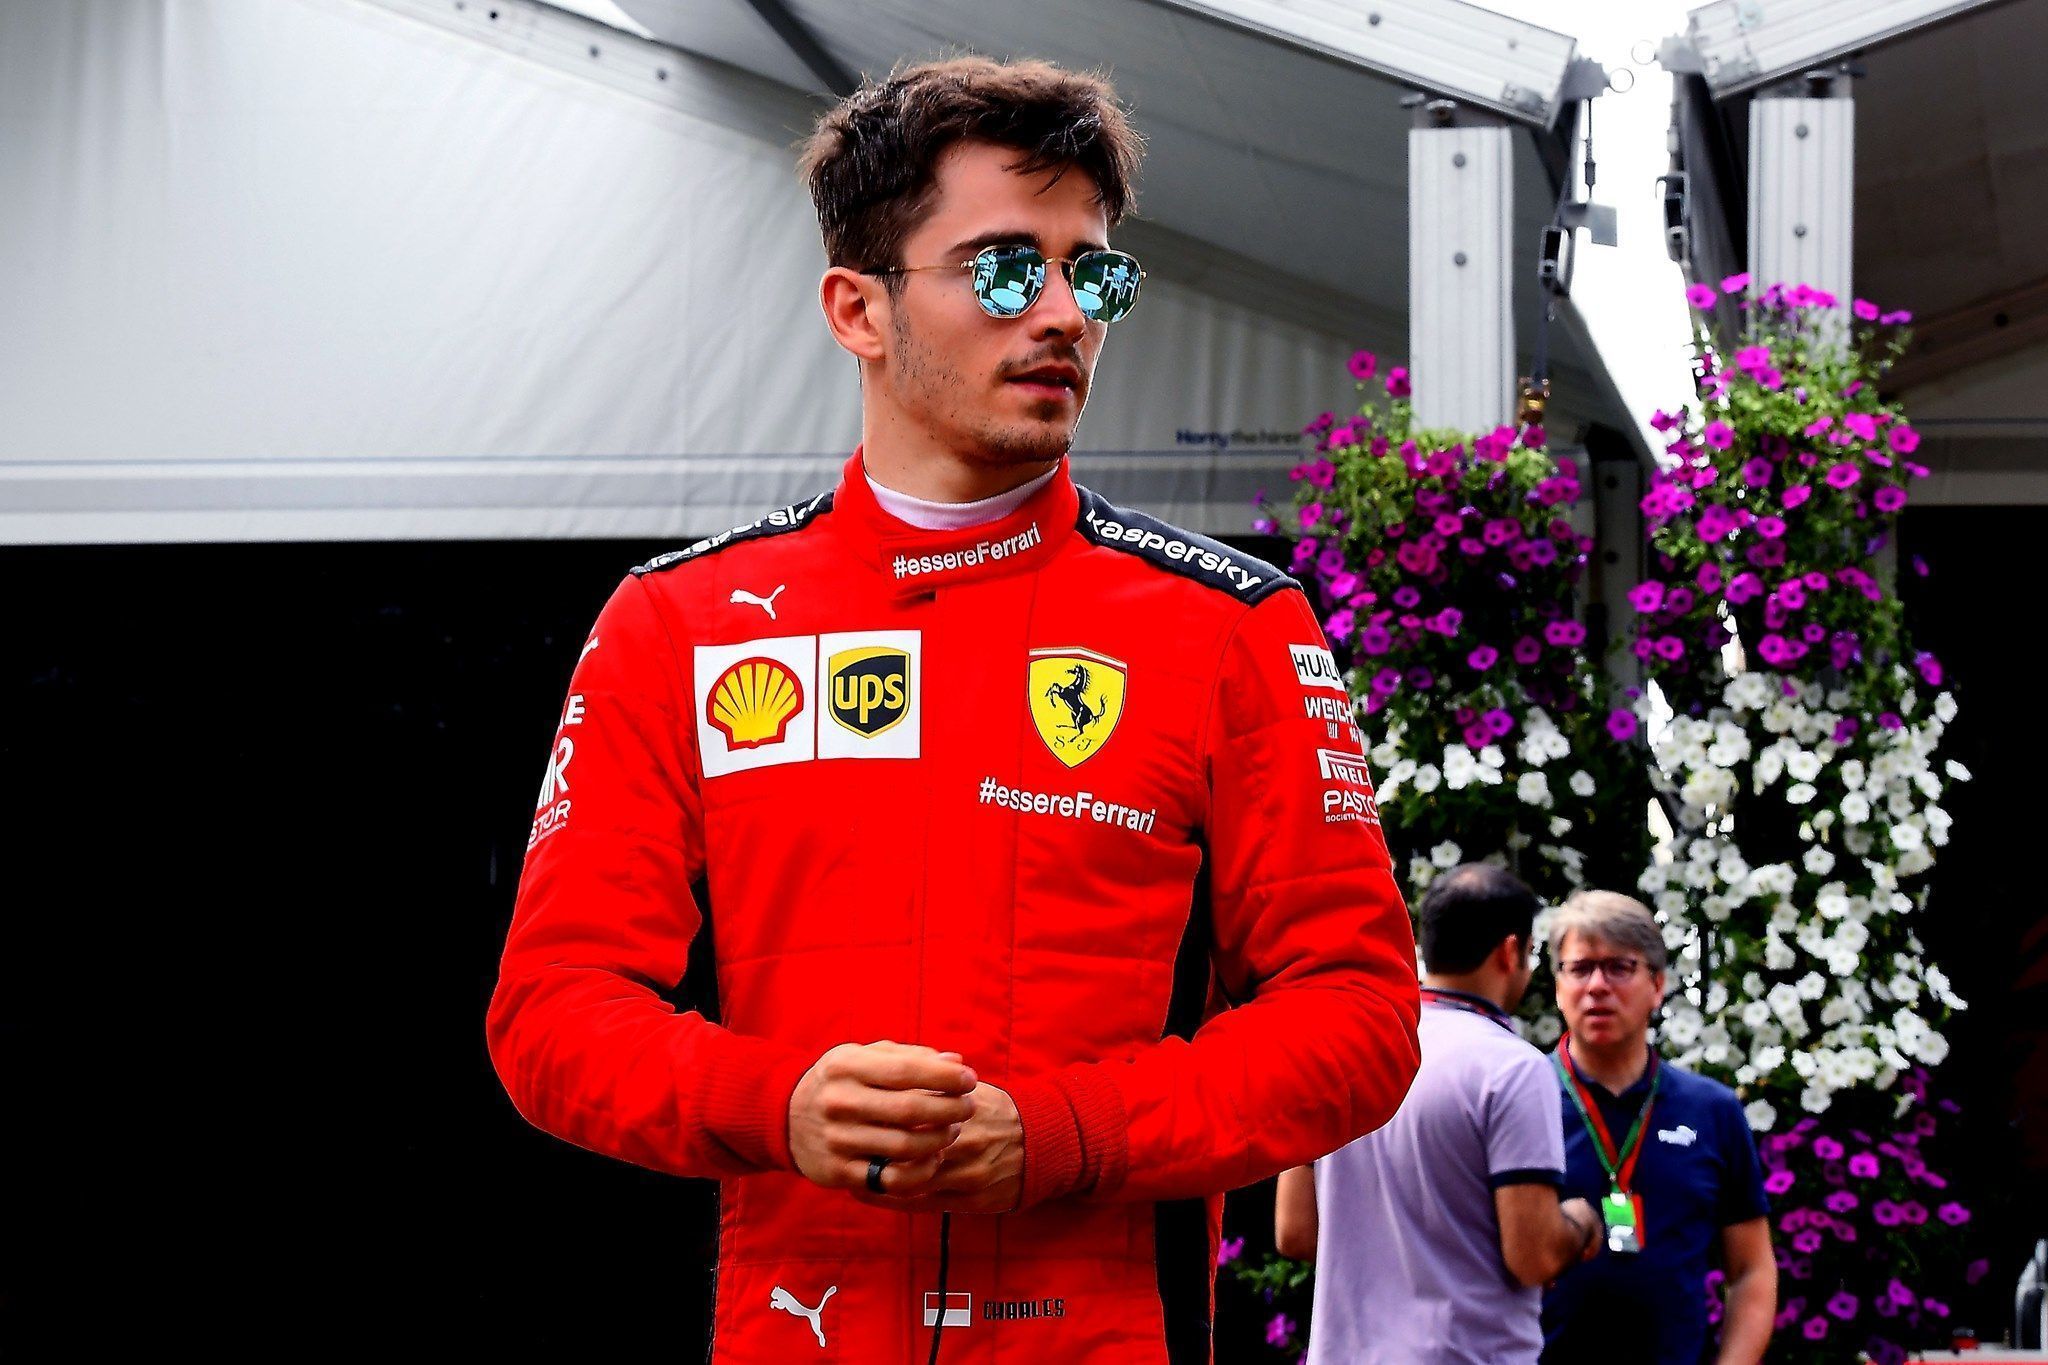 Leclerc answers fan questions in a video shared by Ferrari